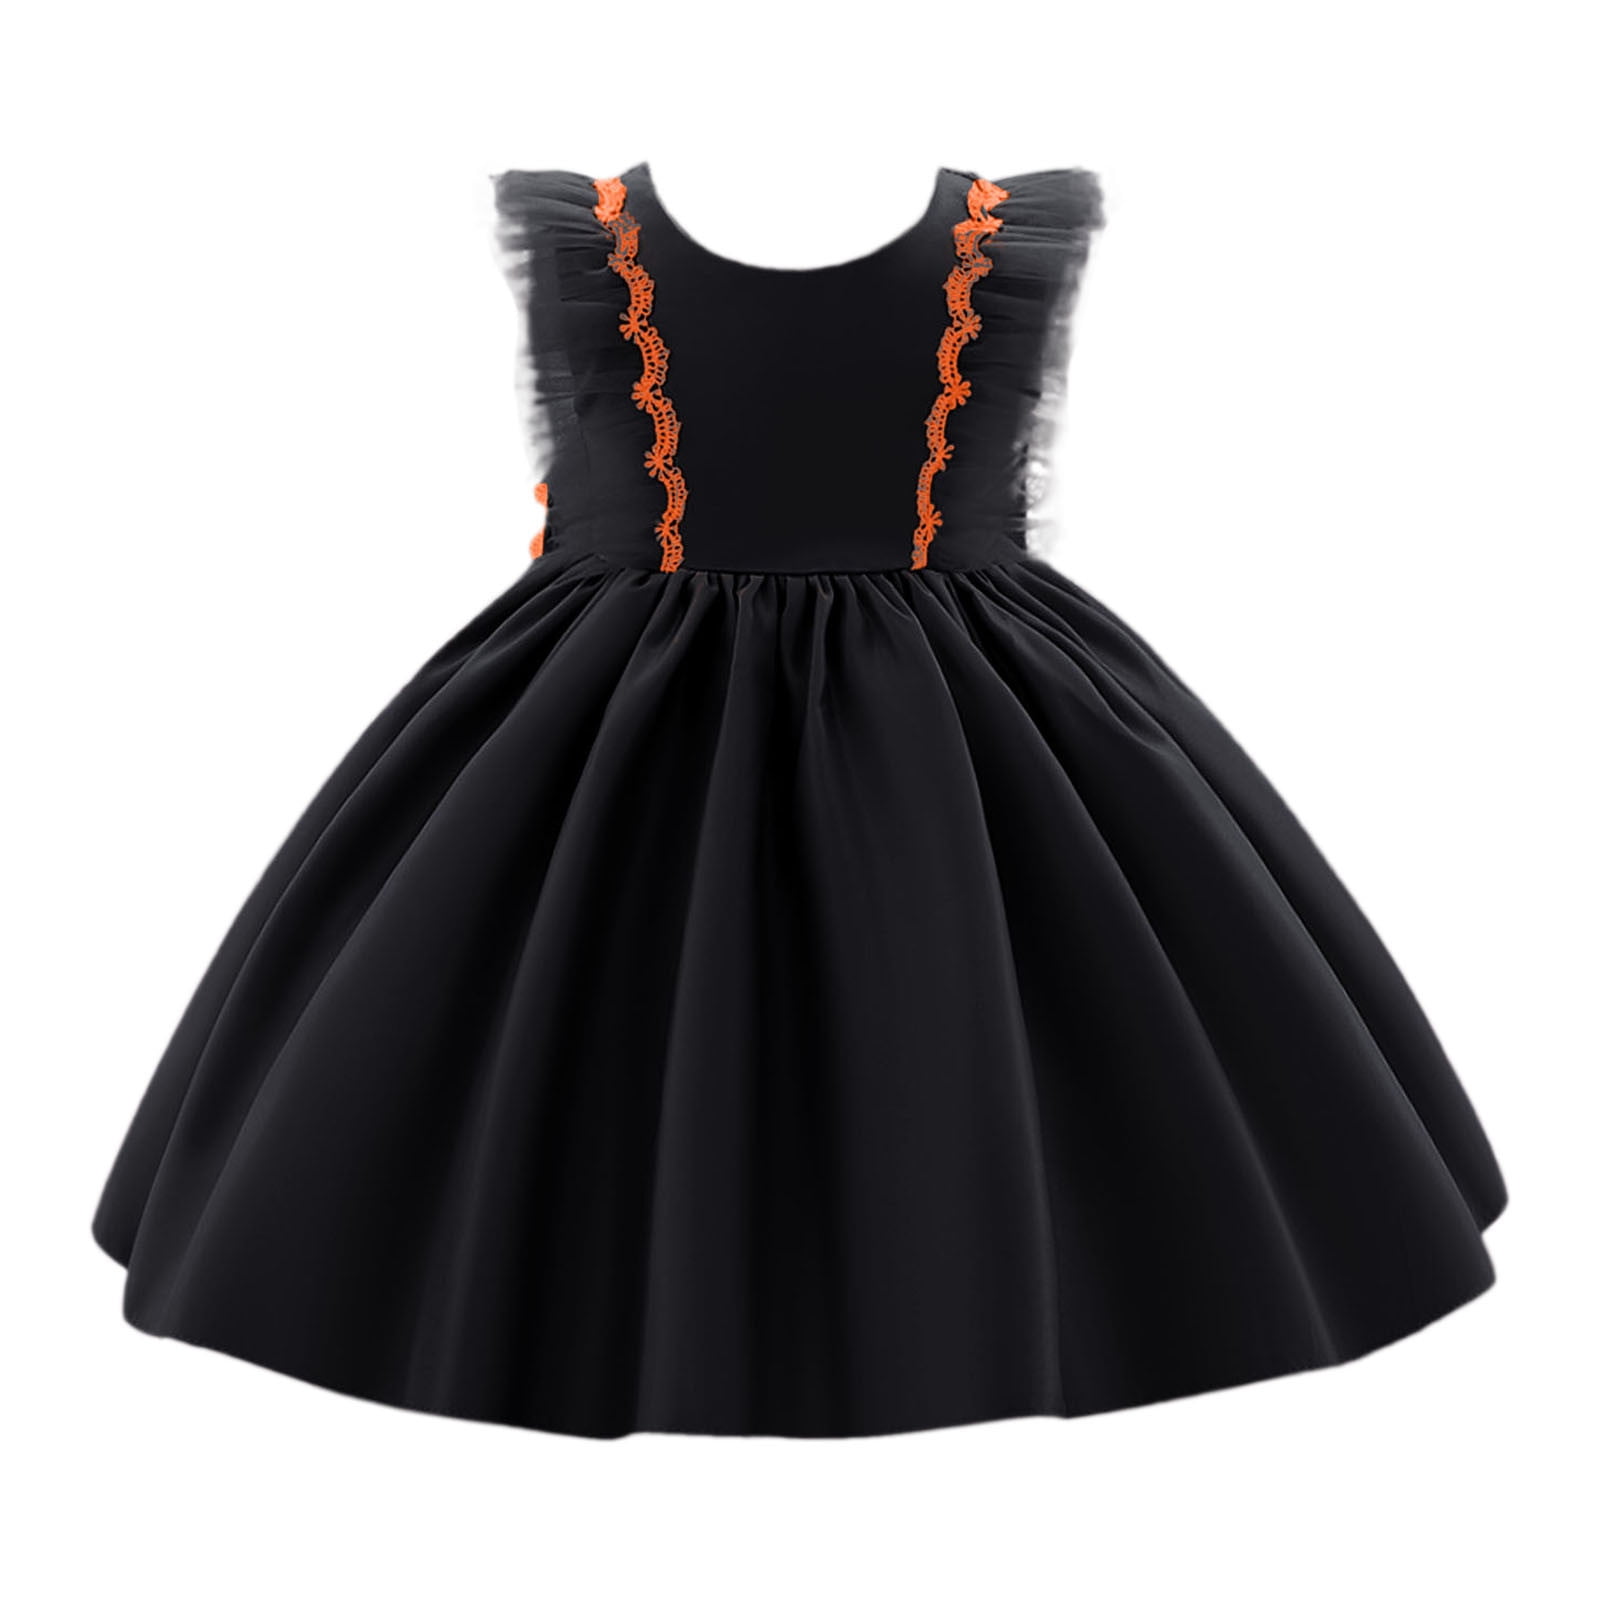 Youmylove Fashion Dresses For Girls Child Bowknot Pageant Dress Party ...